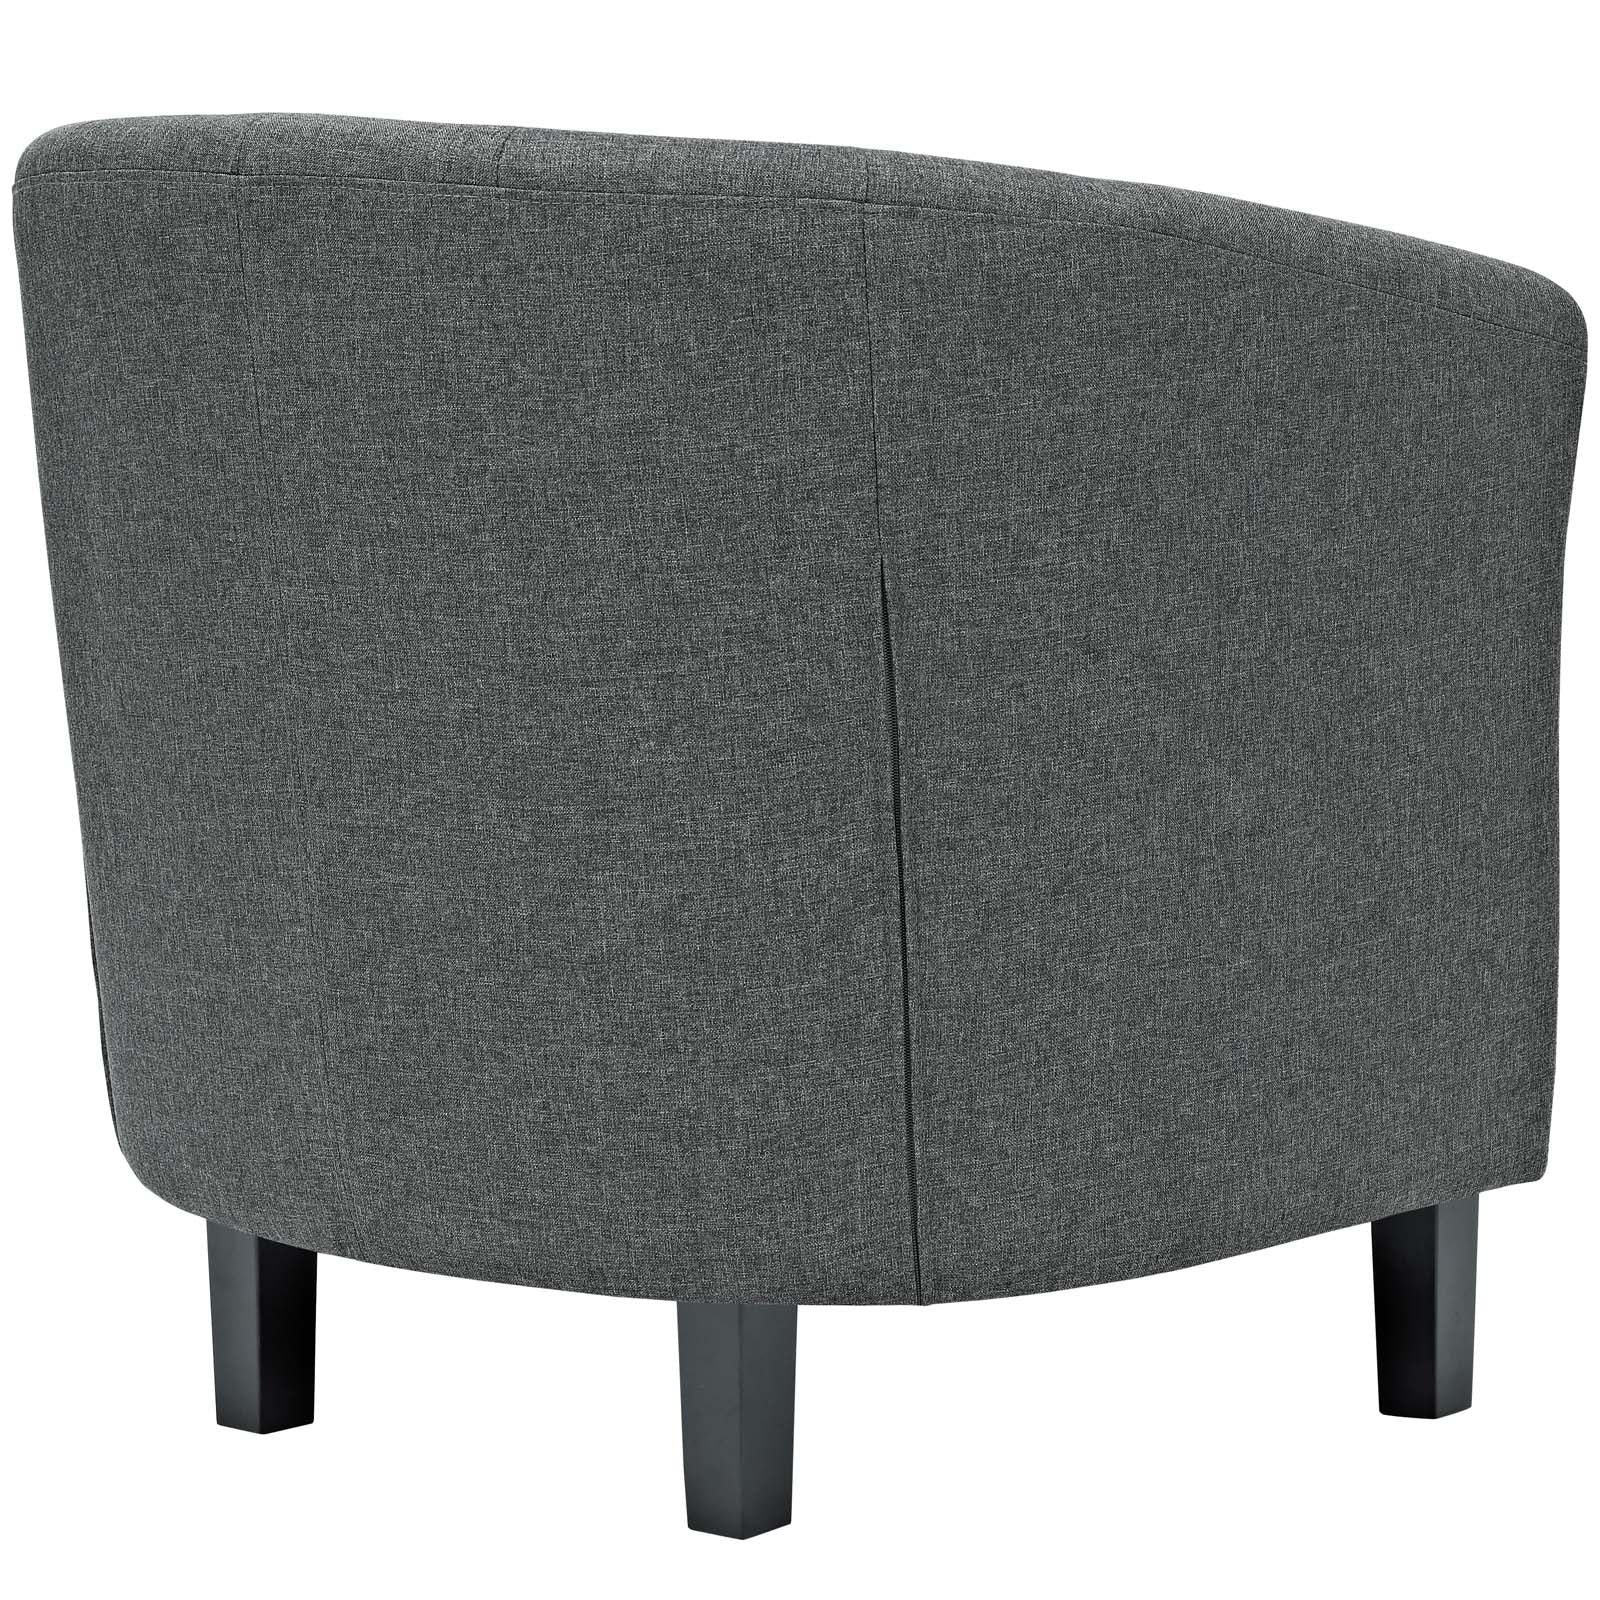 Modway Accent Chairs - Prospect 2 Piece Upholstered Fabric Armchair Set Gray